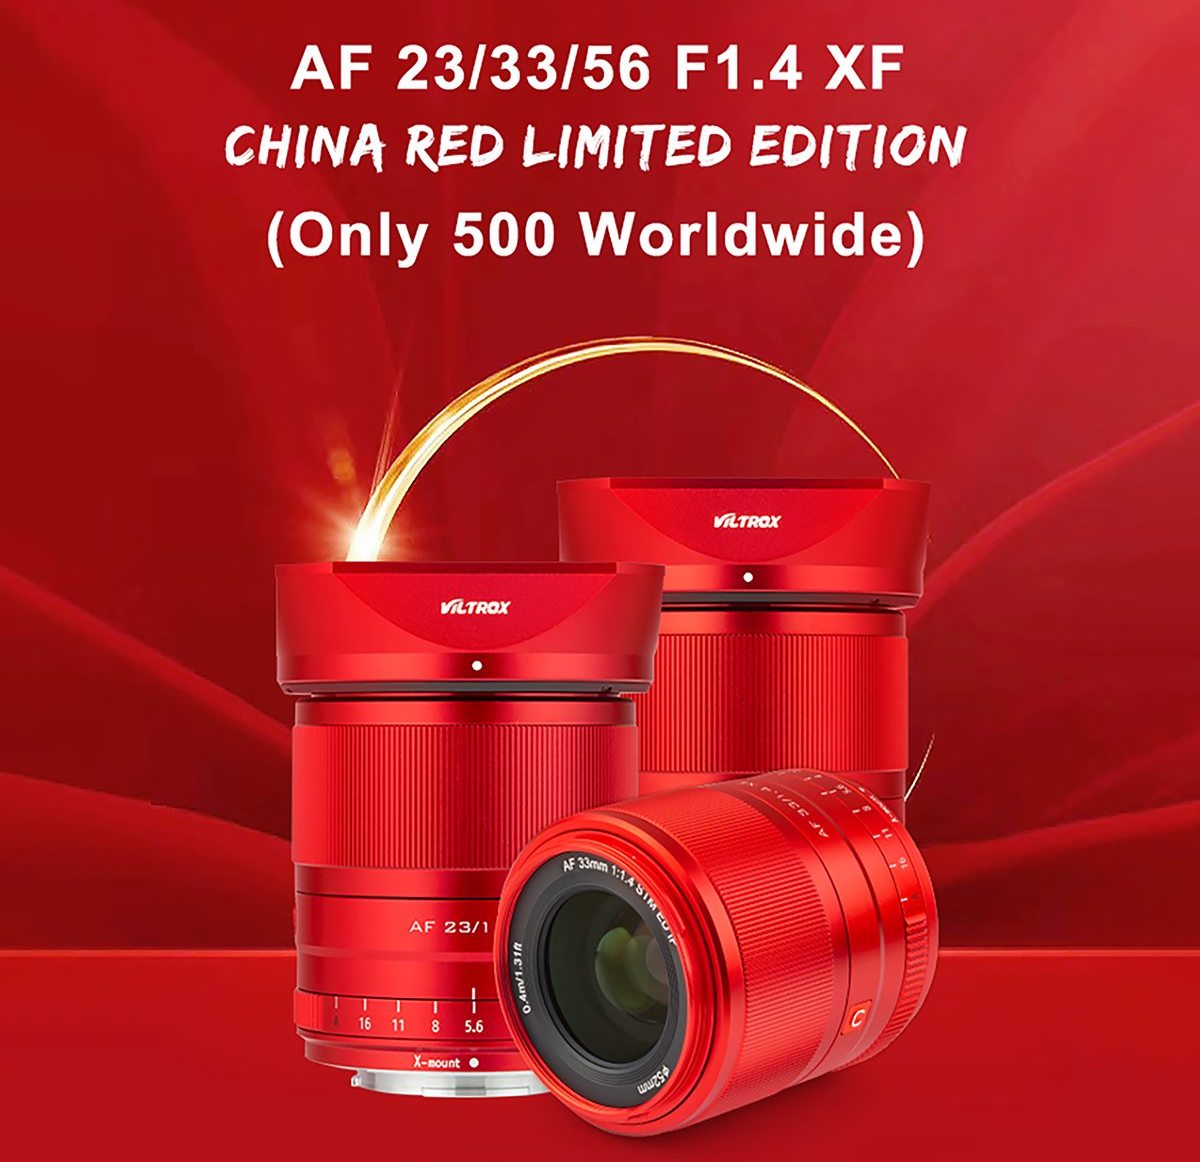 The new red Viltrox limited edition 23/33/56mm XF lenses for Fuji 